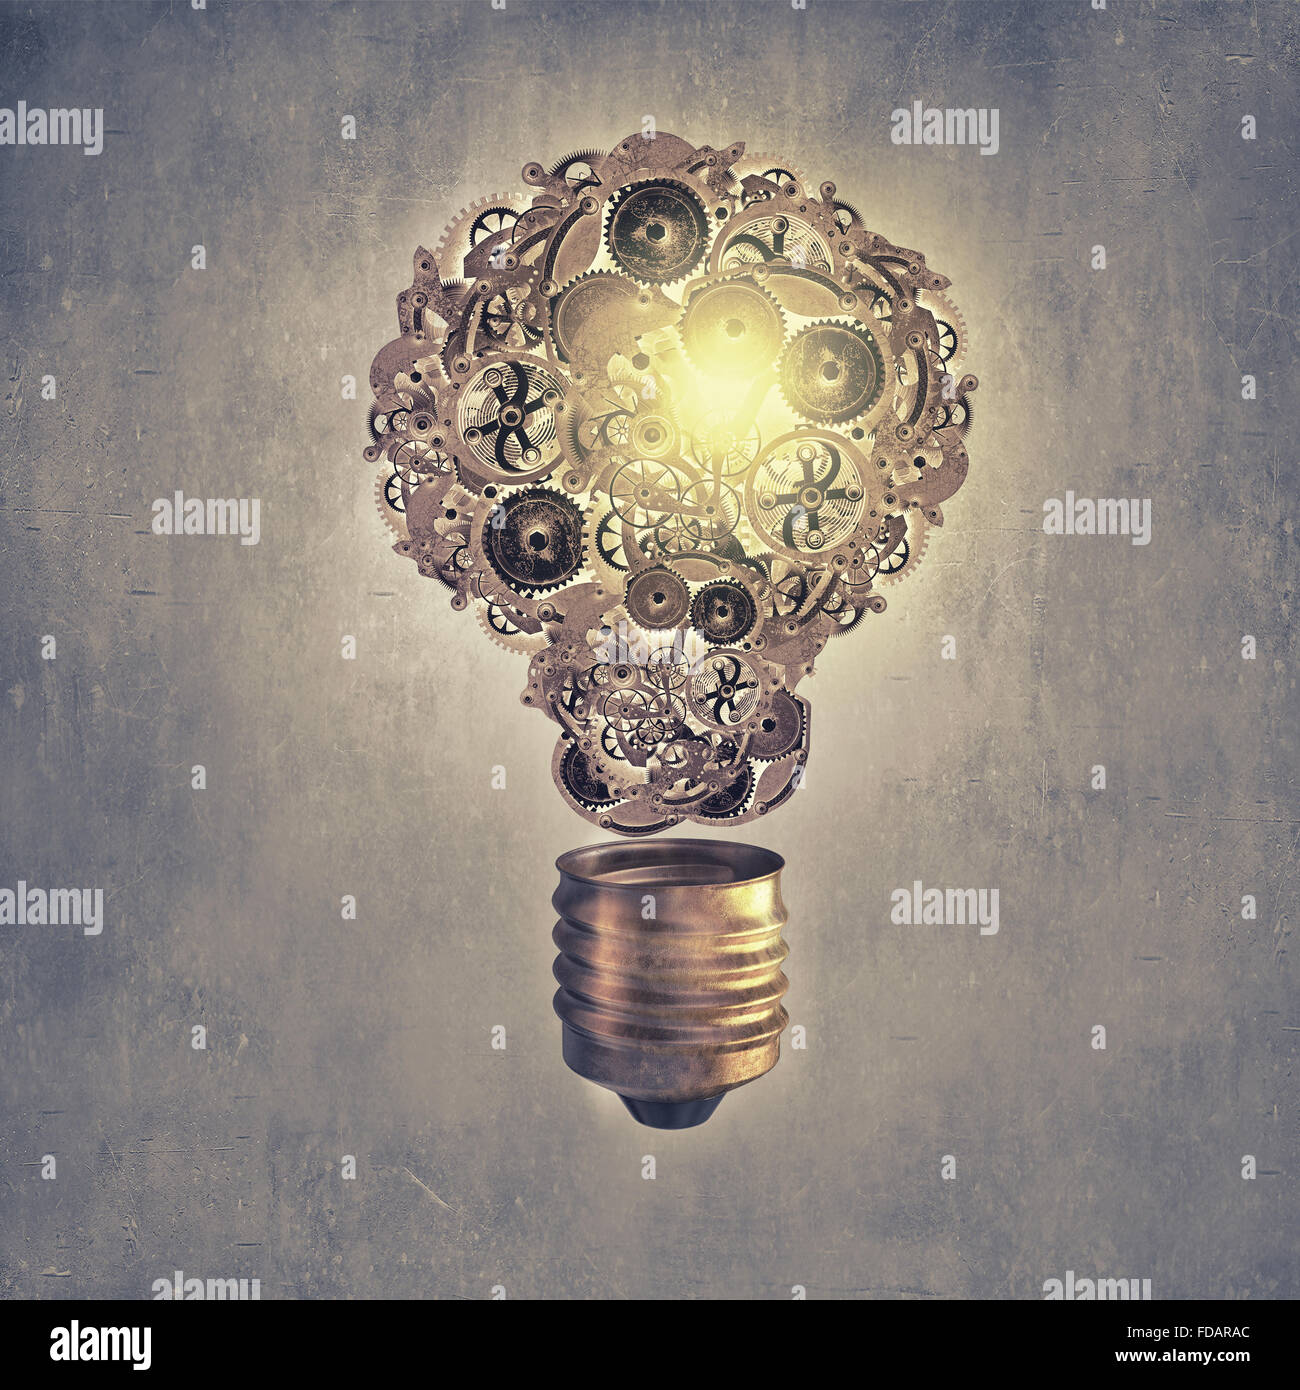 Light bulb concept with gears inside on cement background Stock Photo